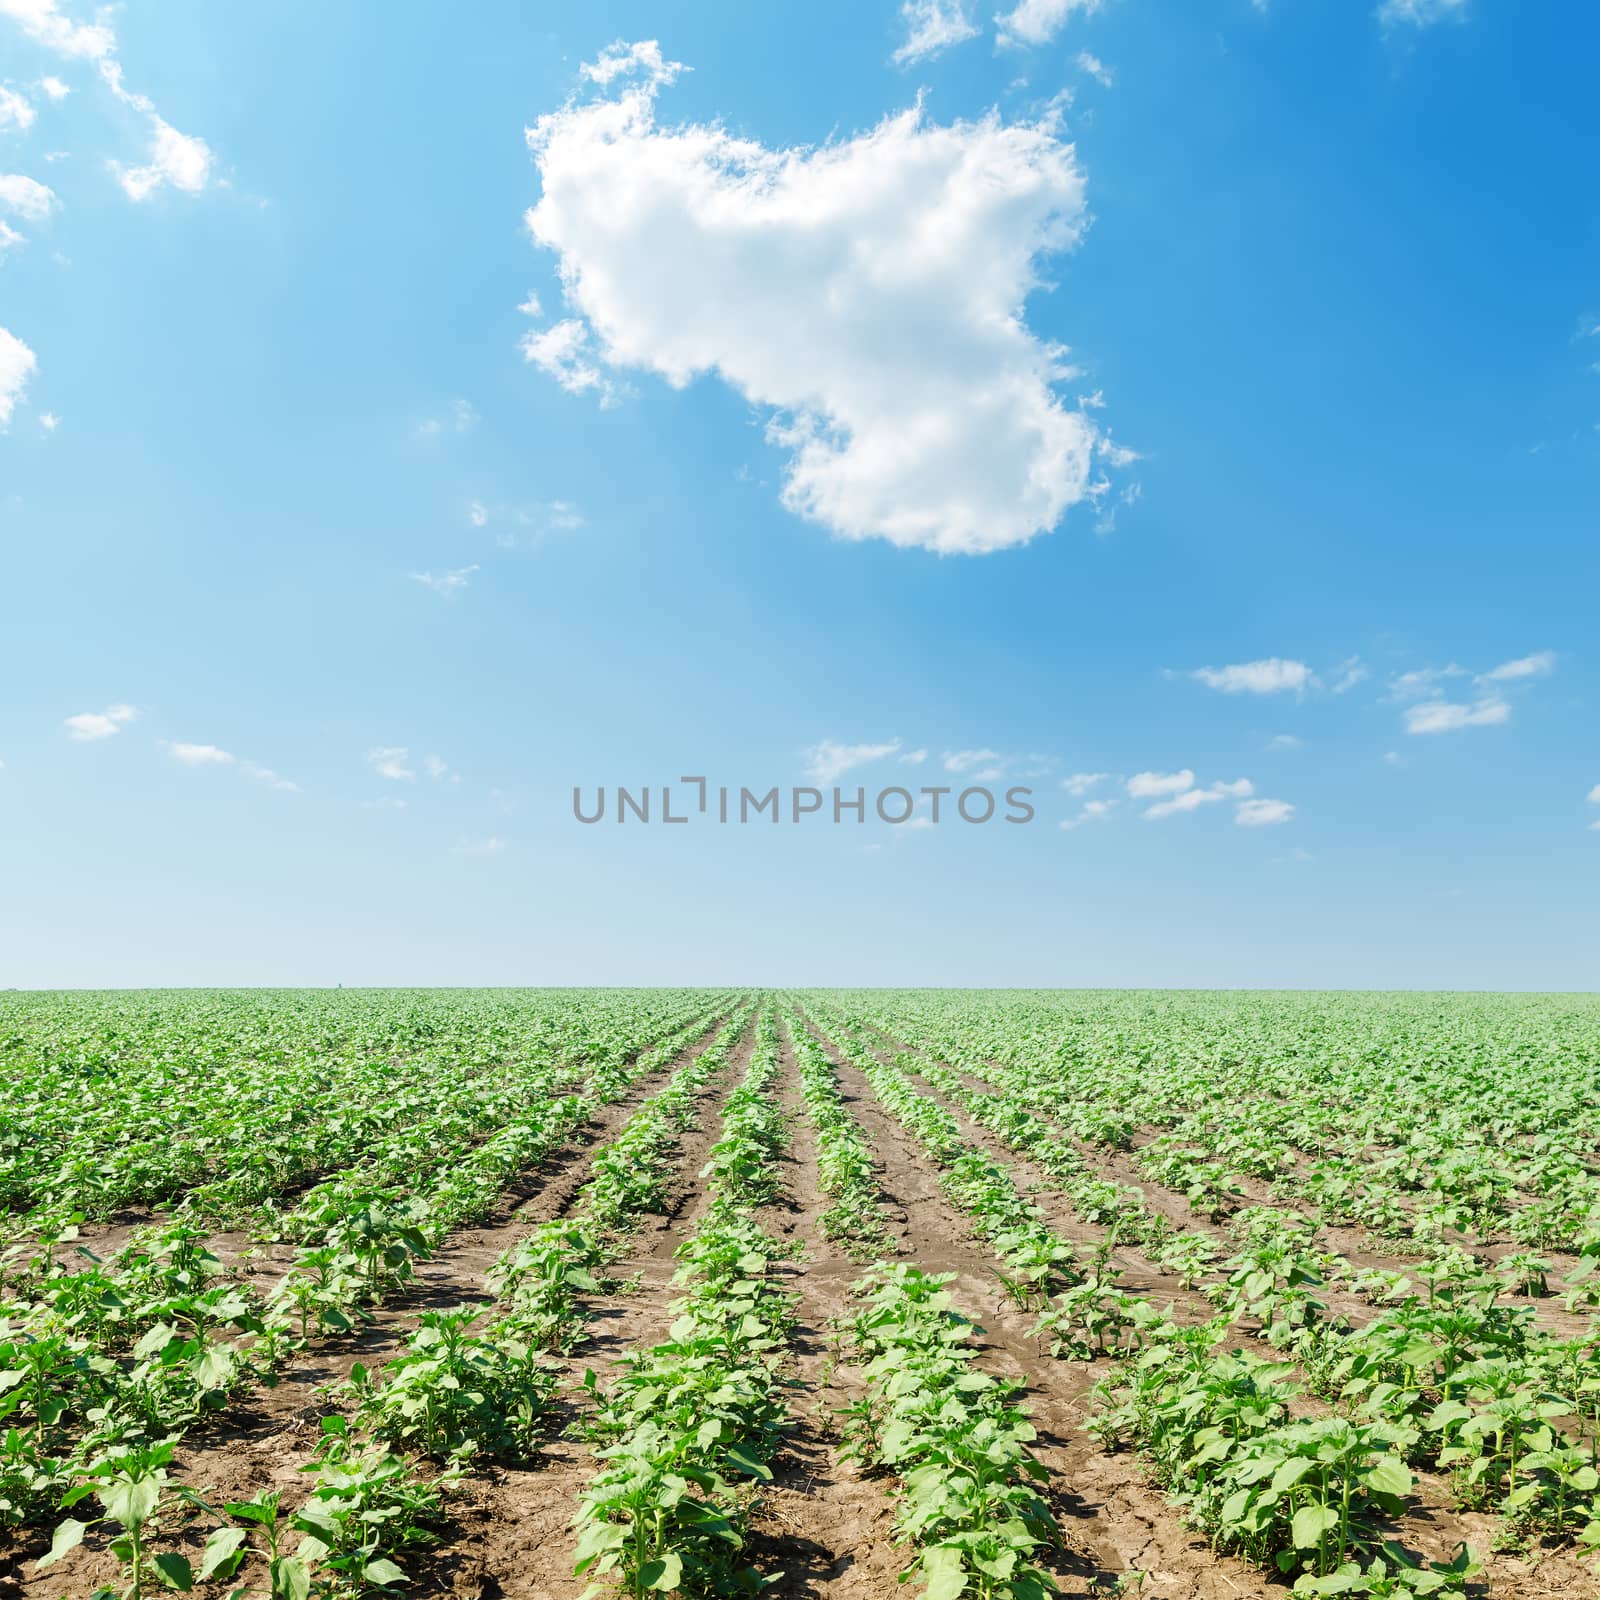 cloud in blue sky over field with green sunflowers by mycola